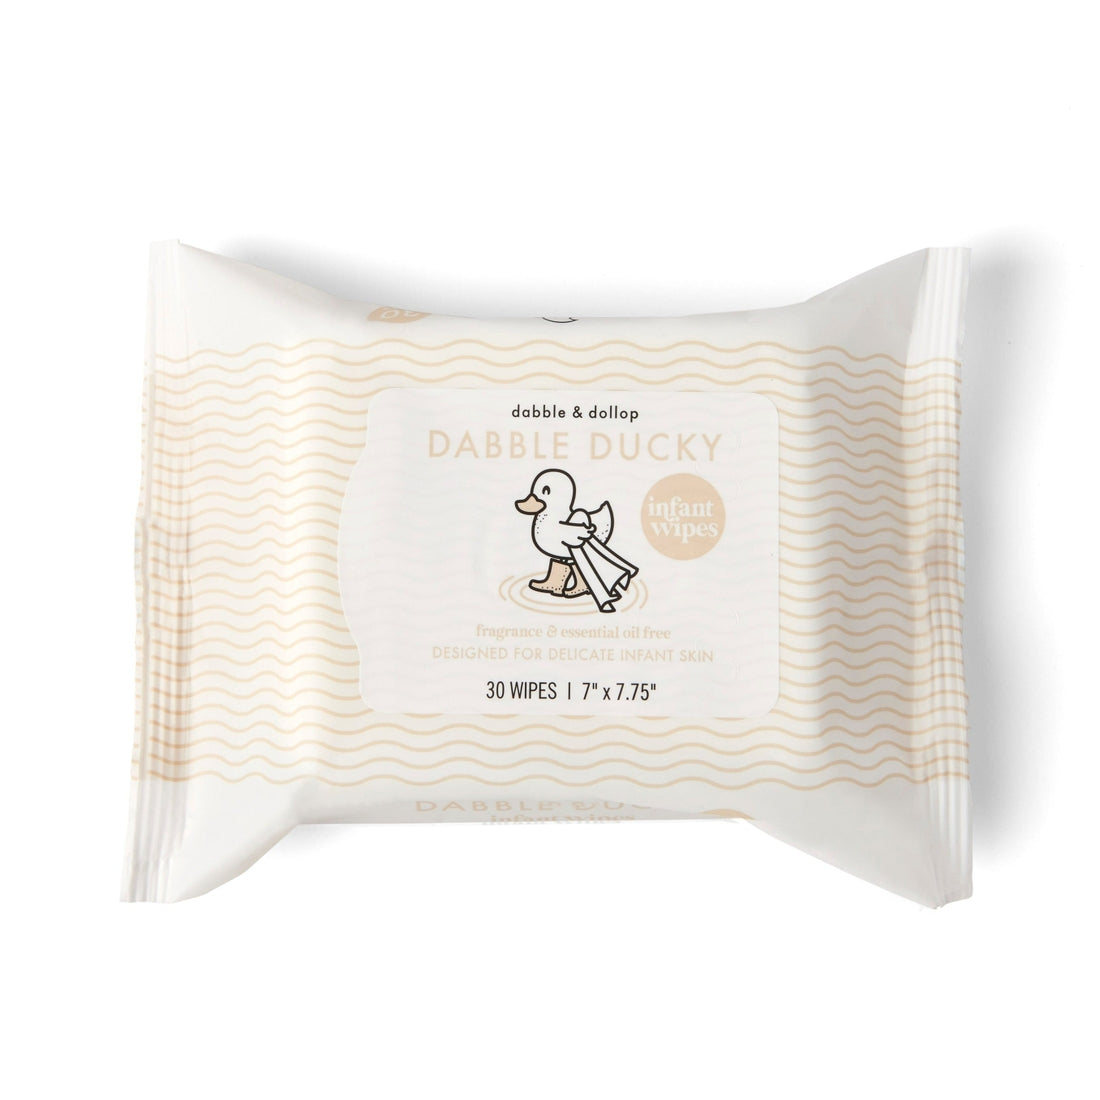 Dallap & Dollop dabble ducky infant wipes against white backdrop